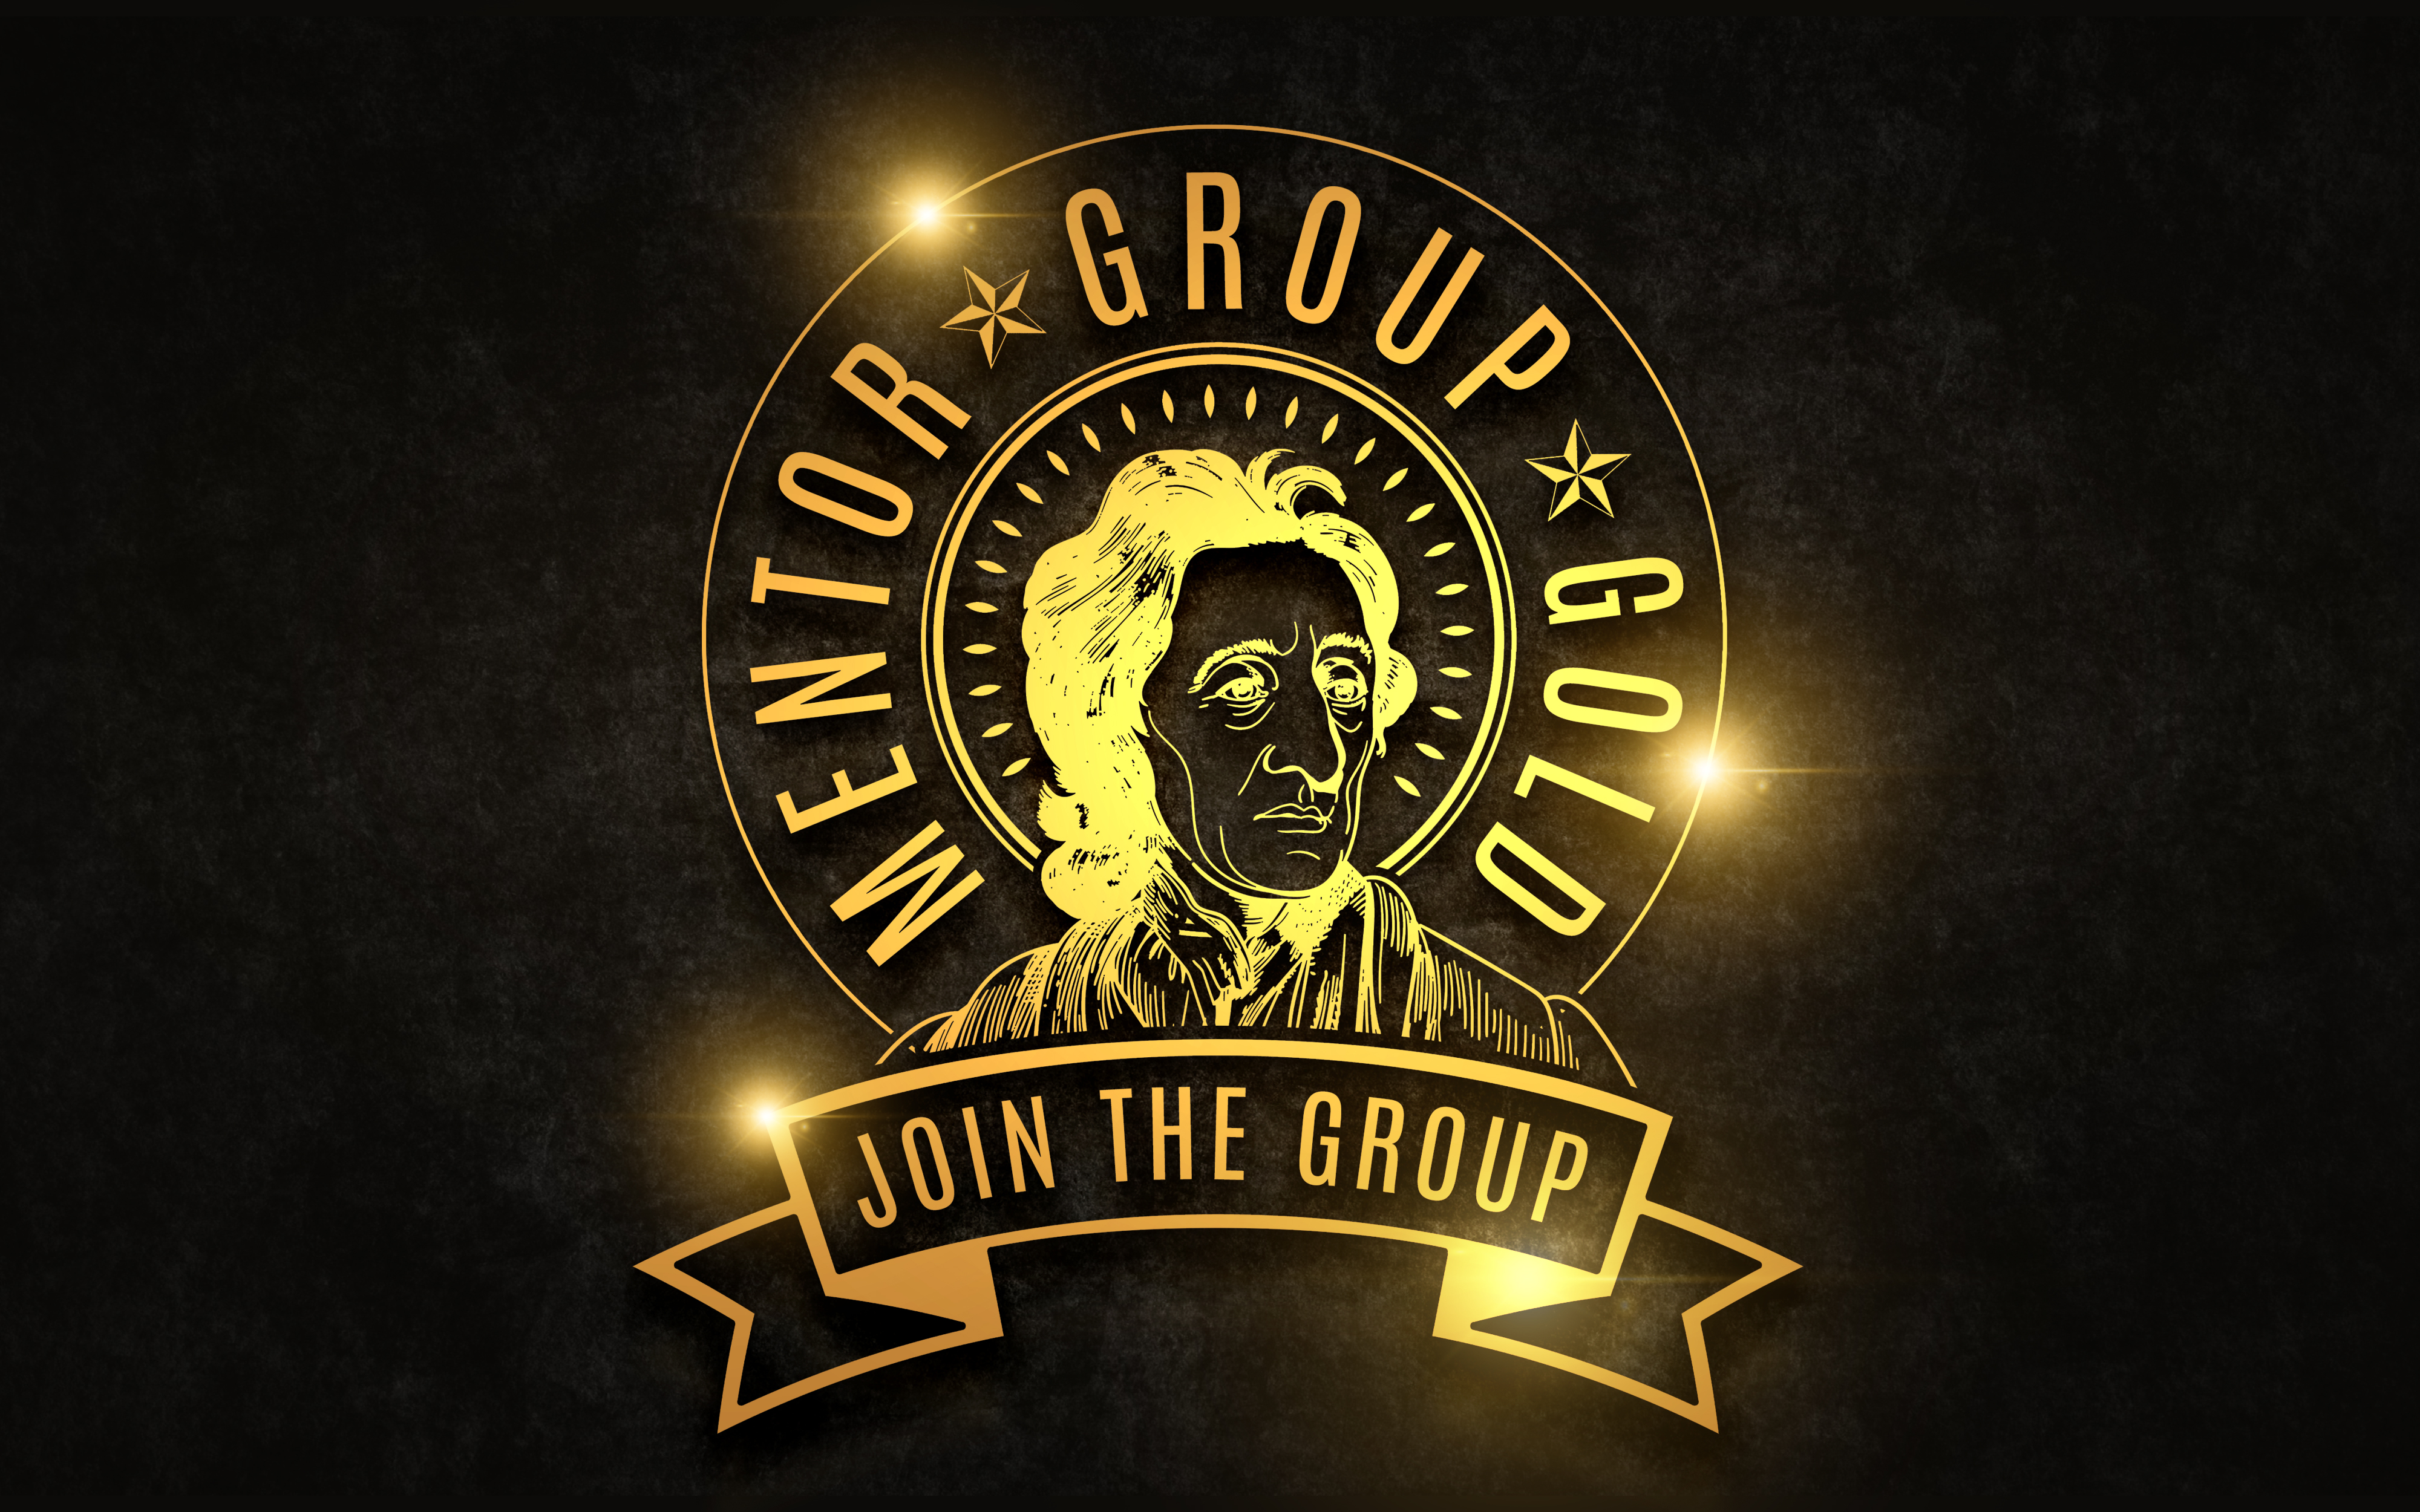 Mentor Group Gold - Exclusive Videos